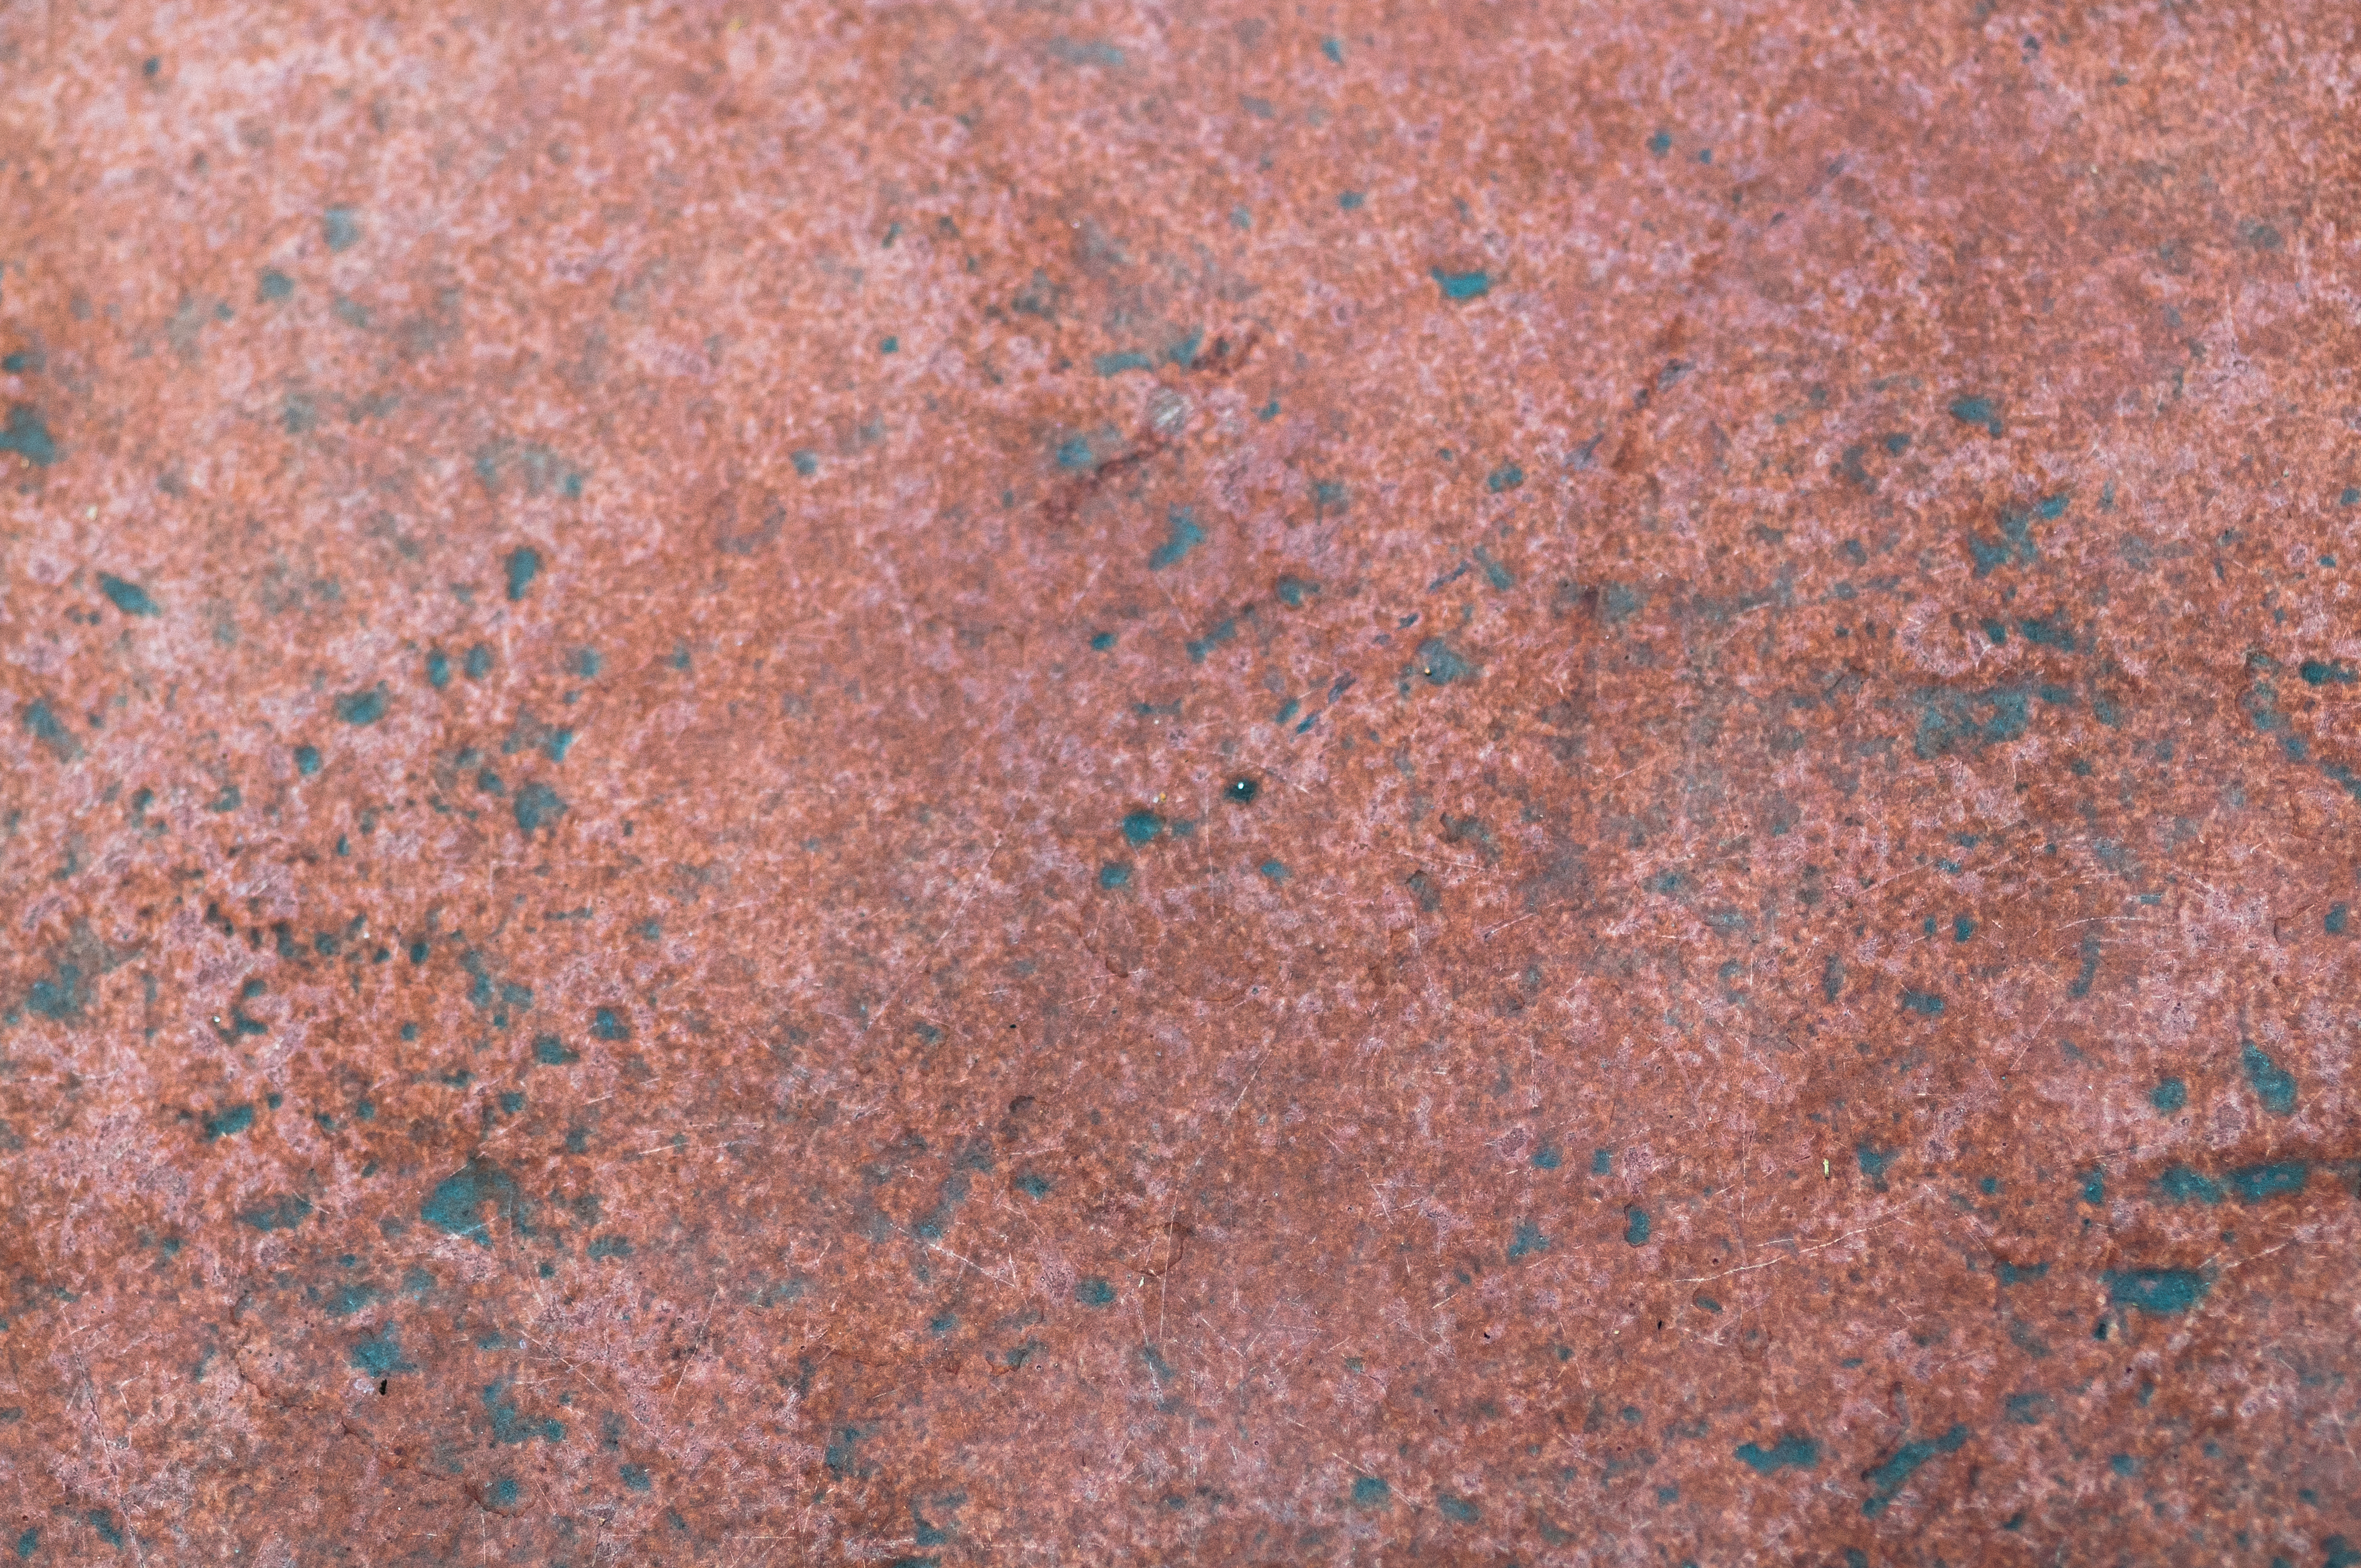 Metal and steel grunge surfaces Archives - Pattern Pictures free ...